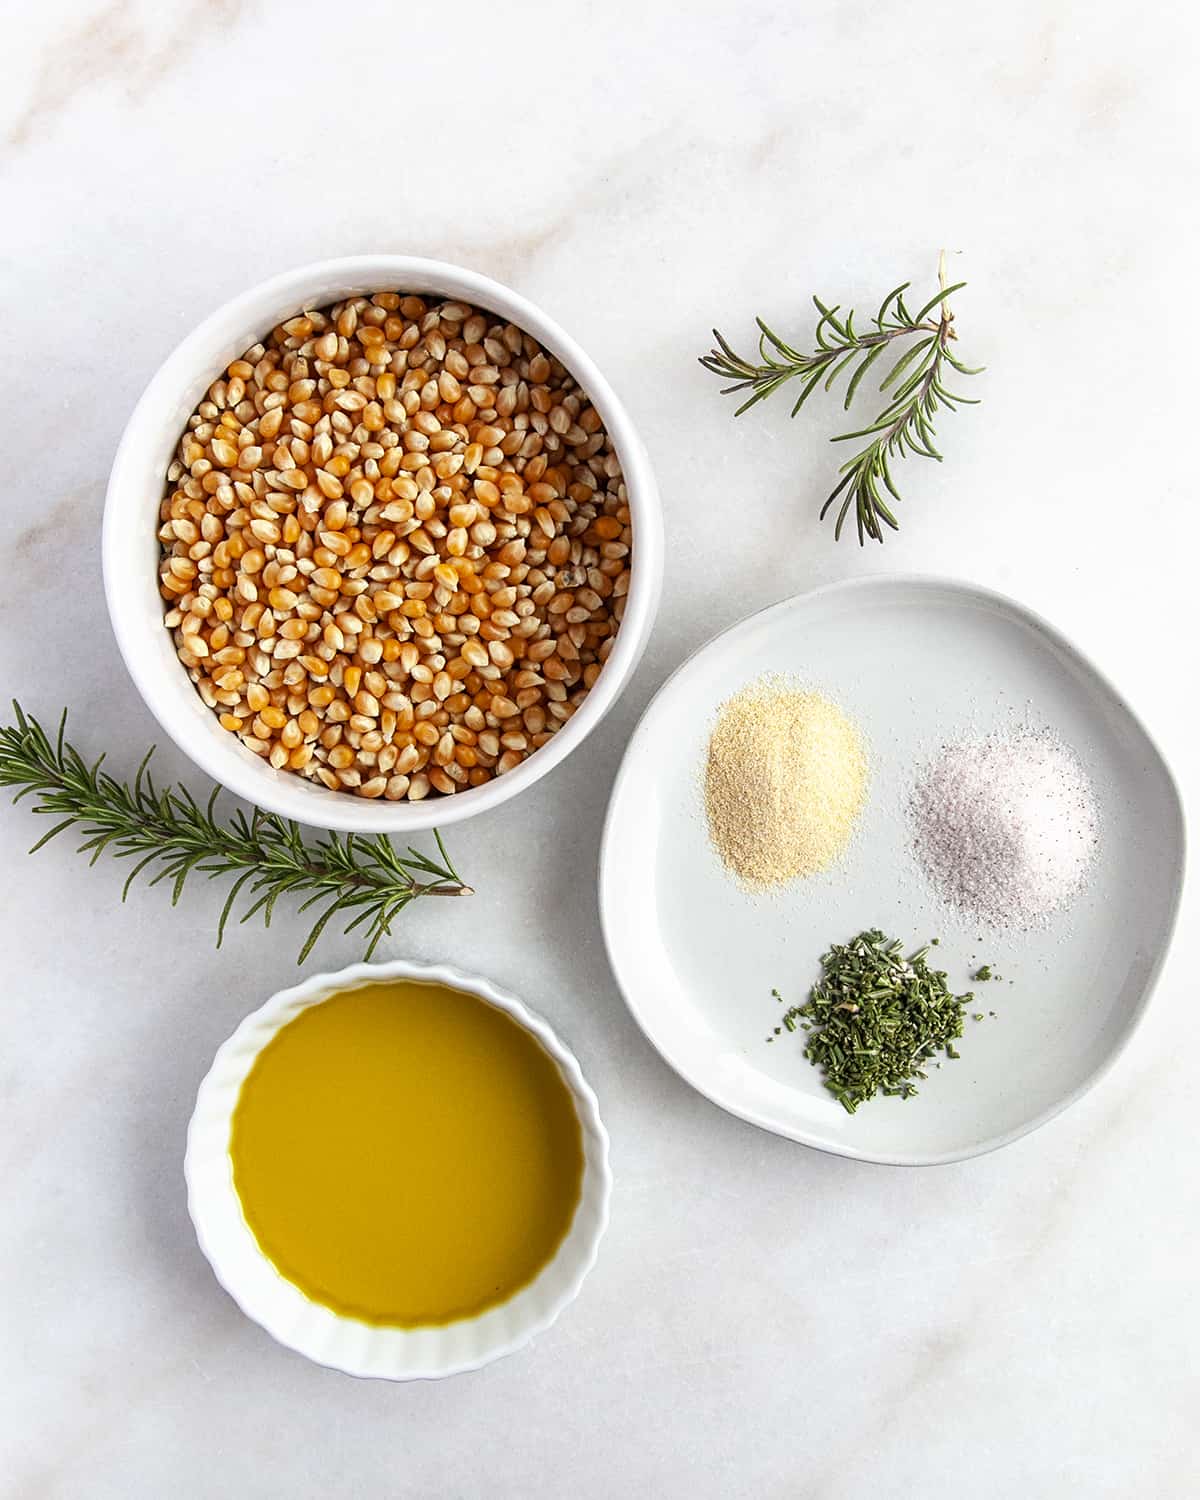 Ingredients for Olive Oil Popcorn - Garlic and Rosemary.